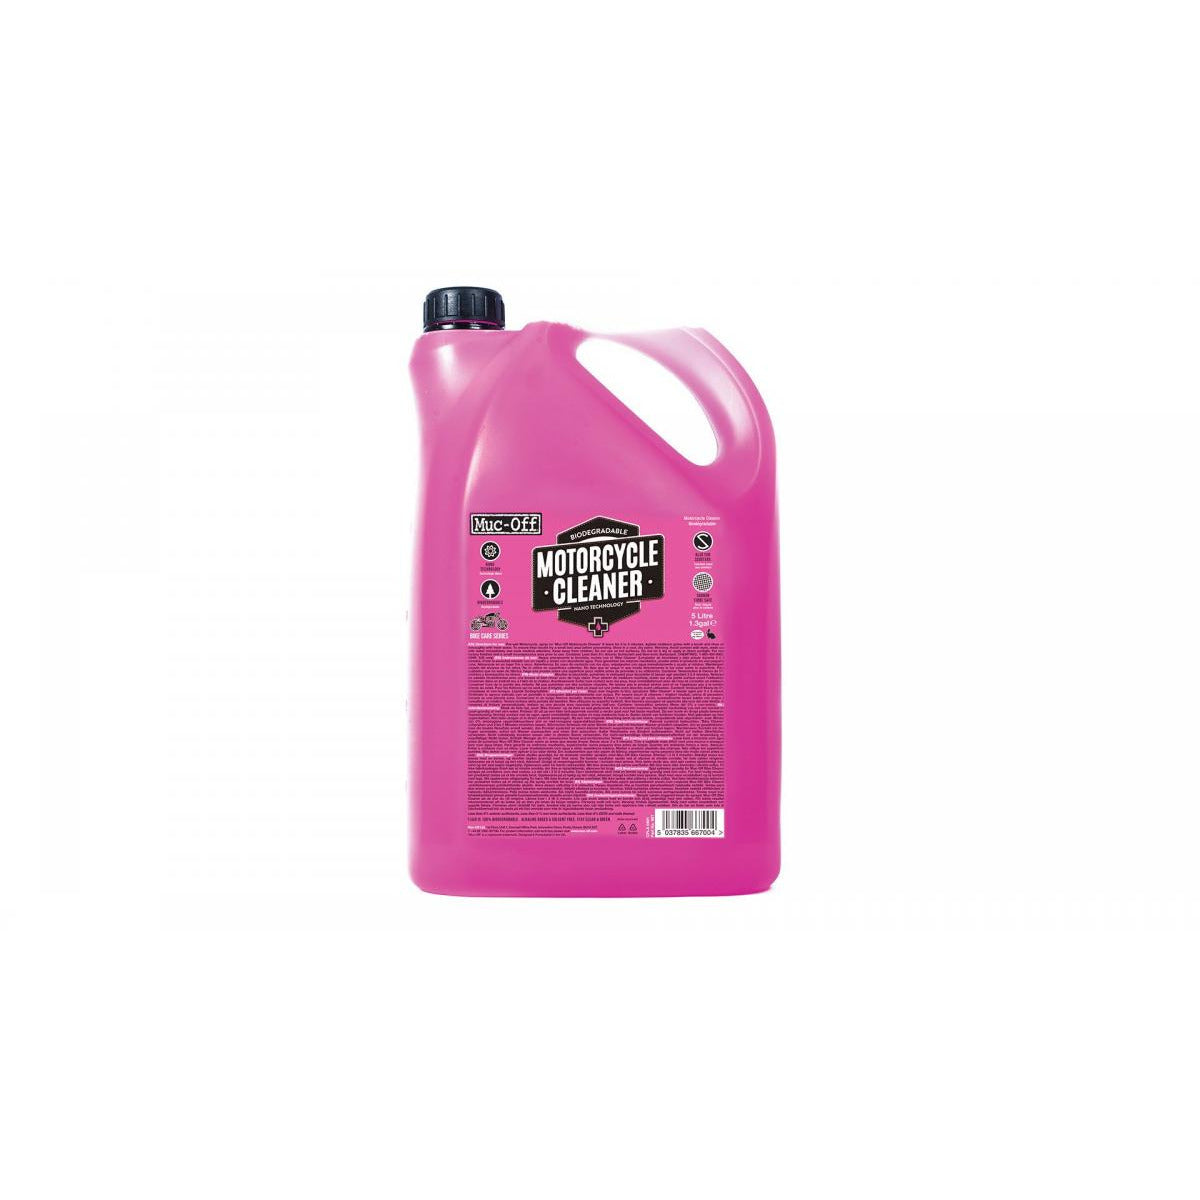 Muc-off Bike Cleaner detergent concentrated 4L